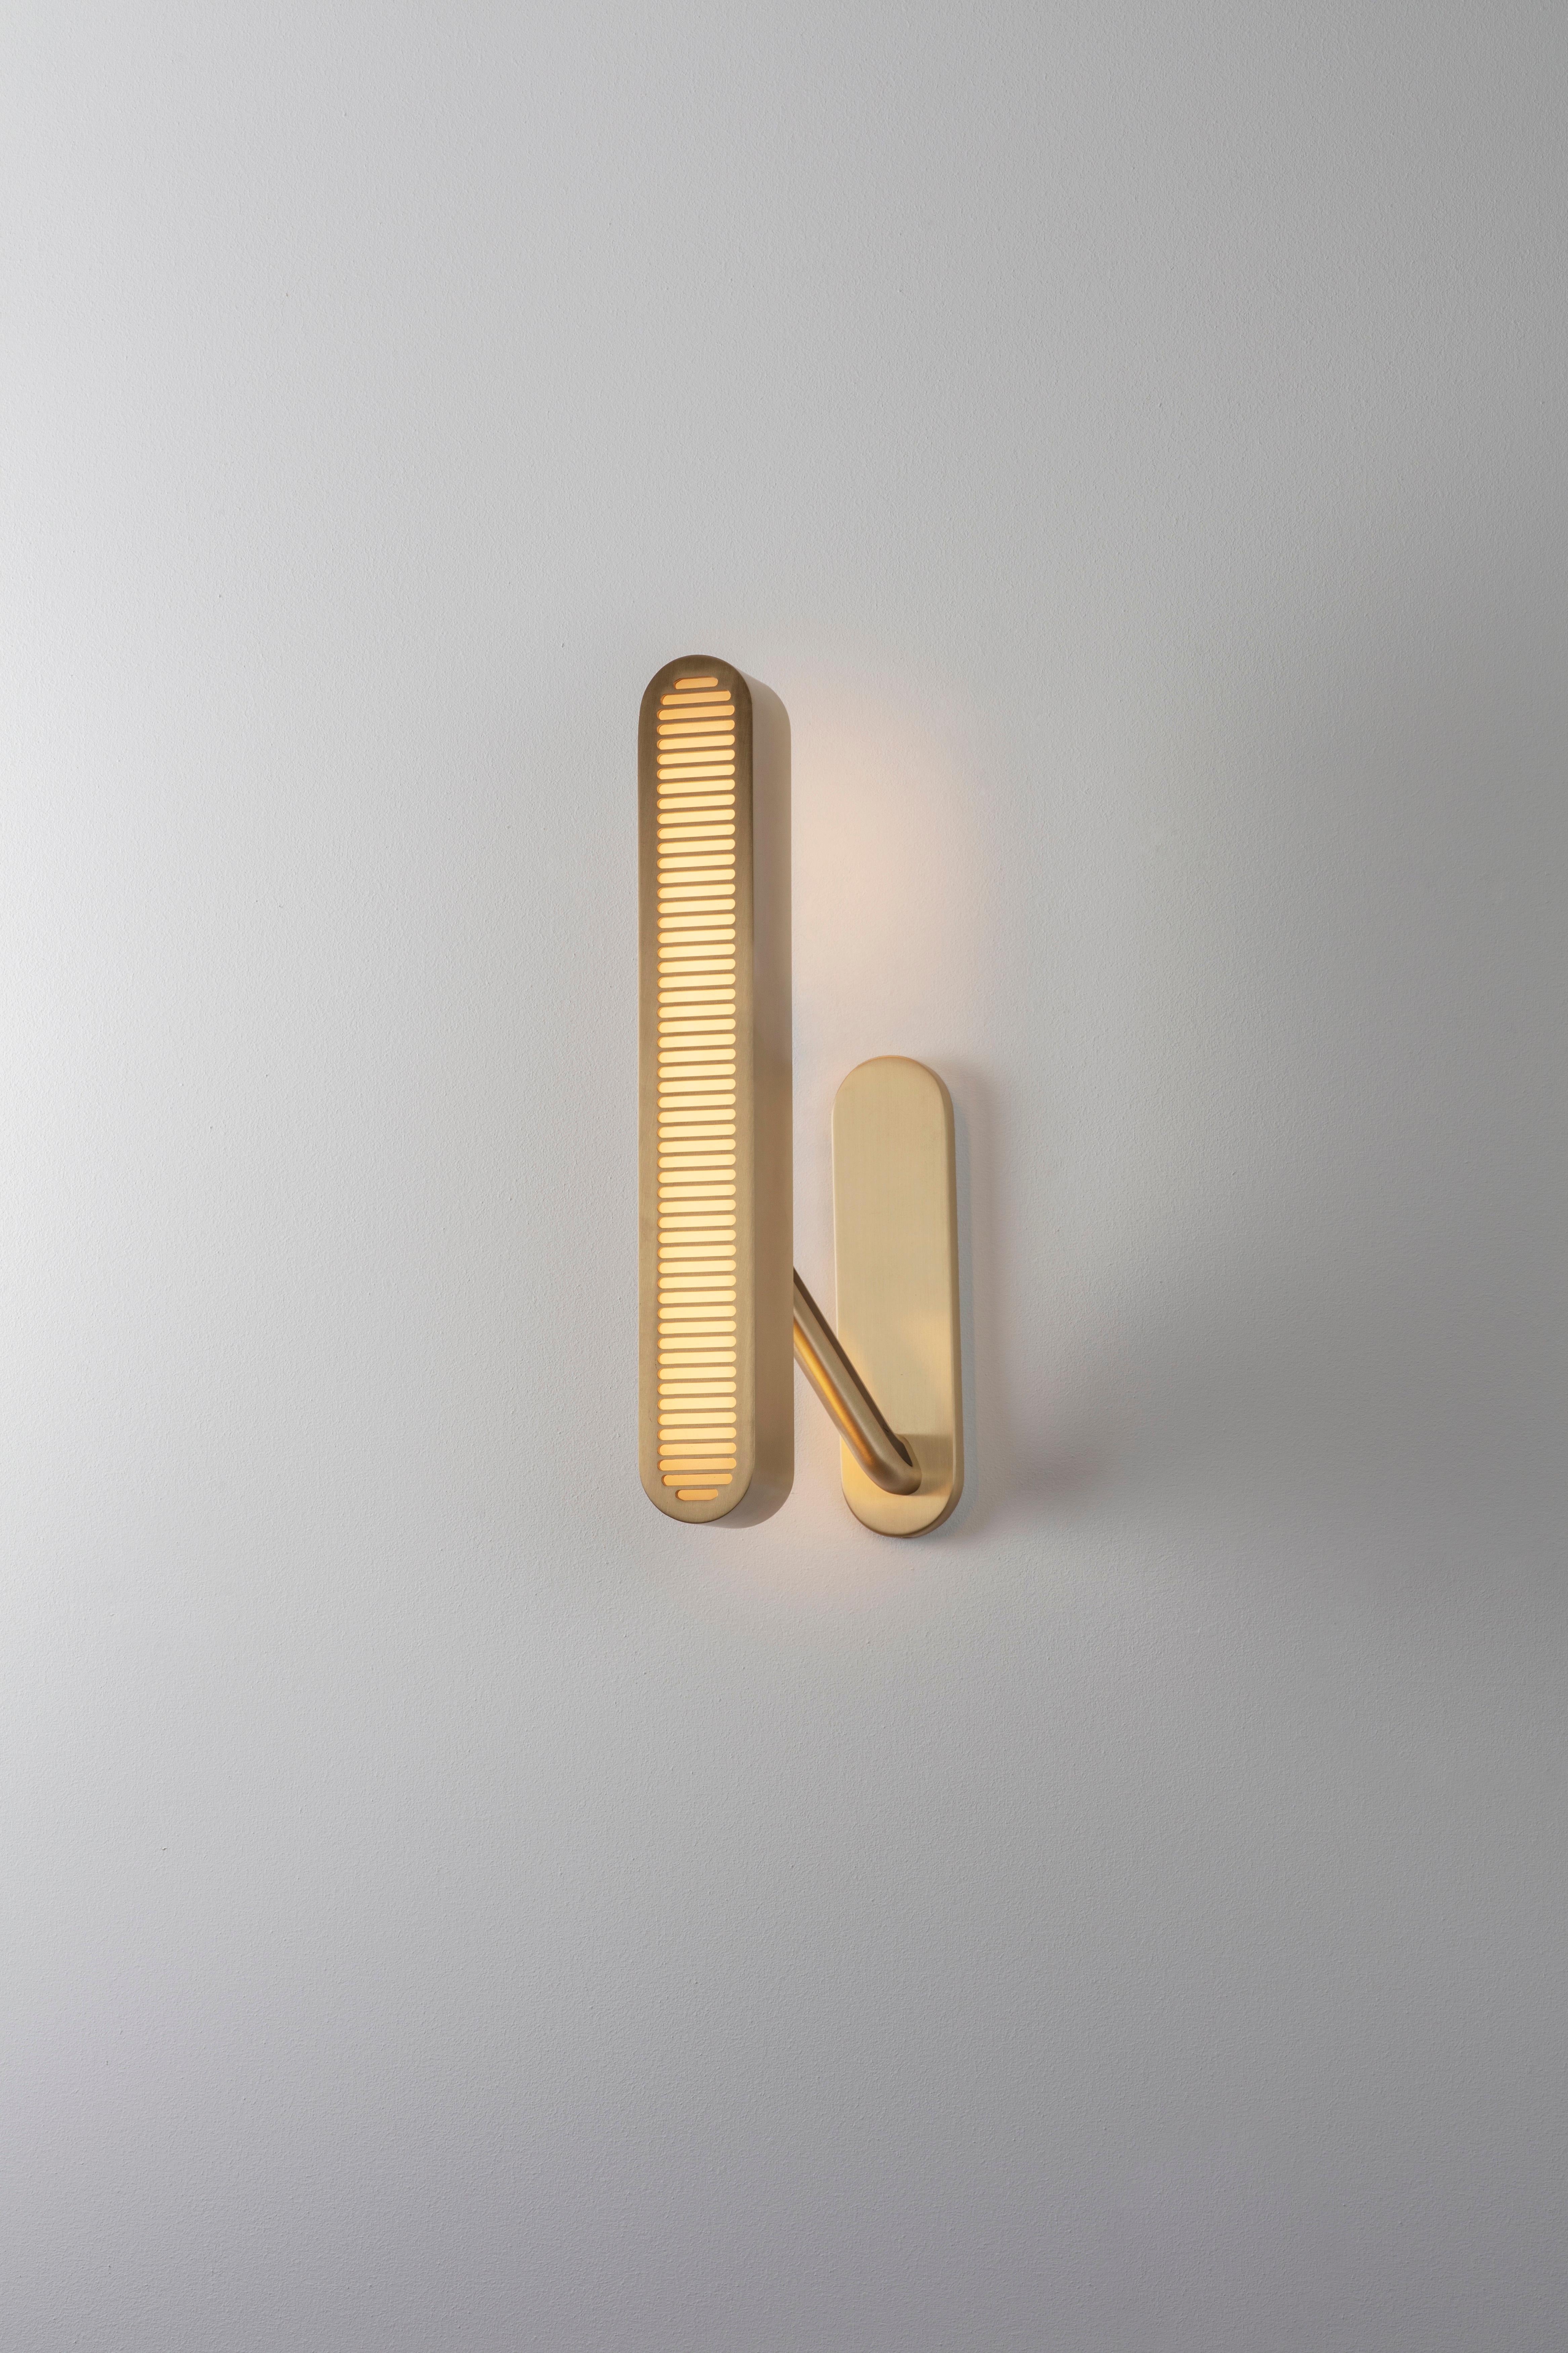 Colt wall light single by Bert Frank
Dimensions: 17 x 10 x 40 cm
Materials: Brass, bronze

Brushed brass lacquered as standard, custom finishes available.

The Bert Frank aesthetic is one of subtle quirks and twists. Asymmetry is one of those. Colt